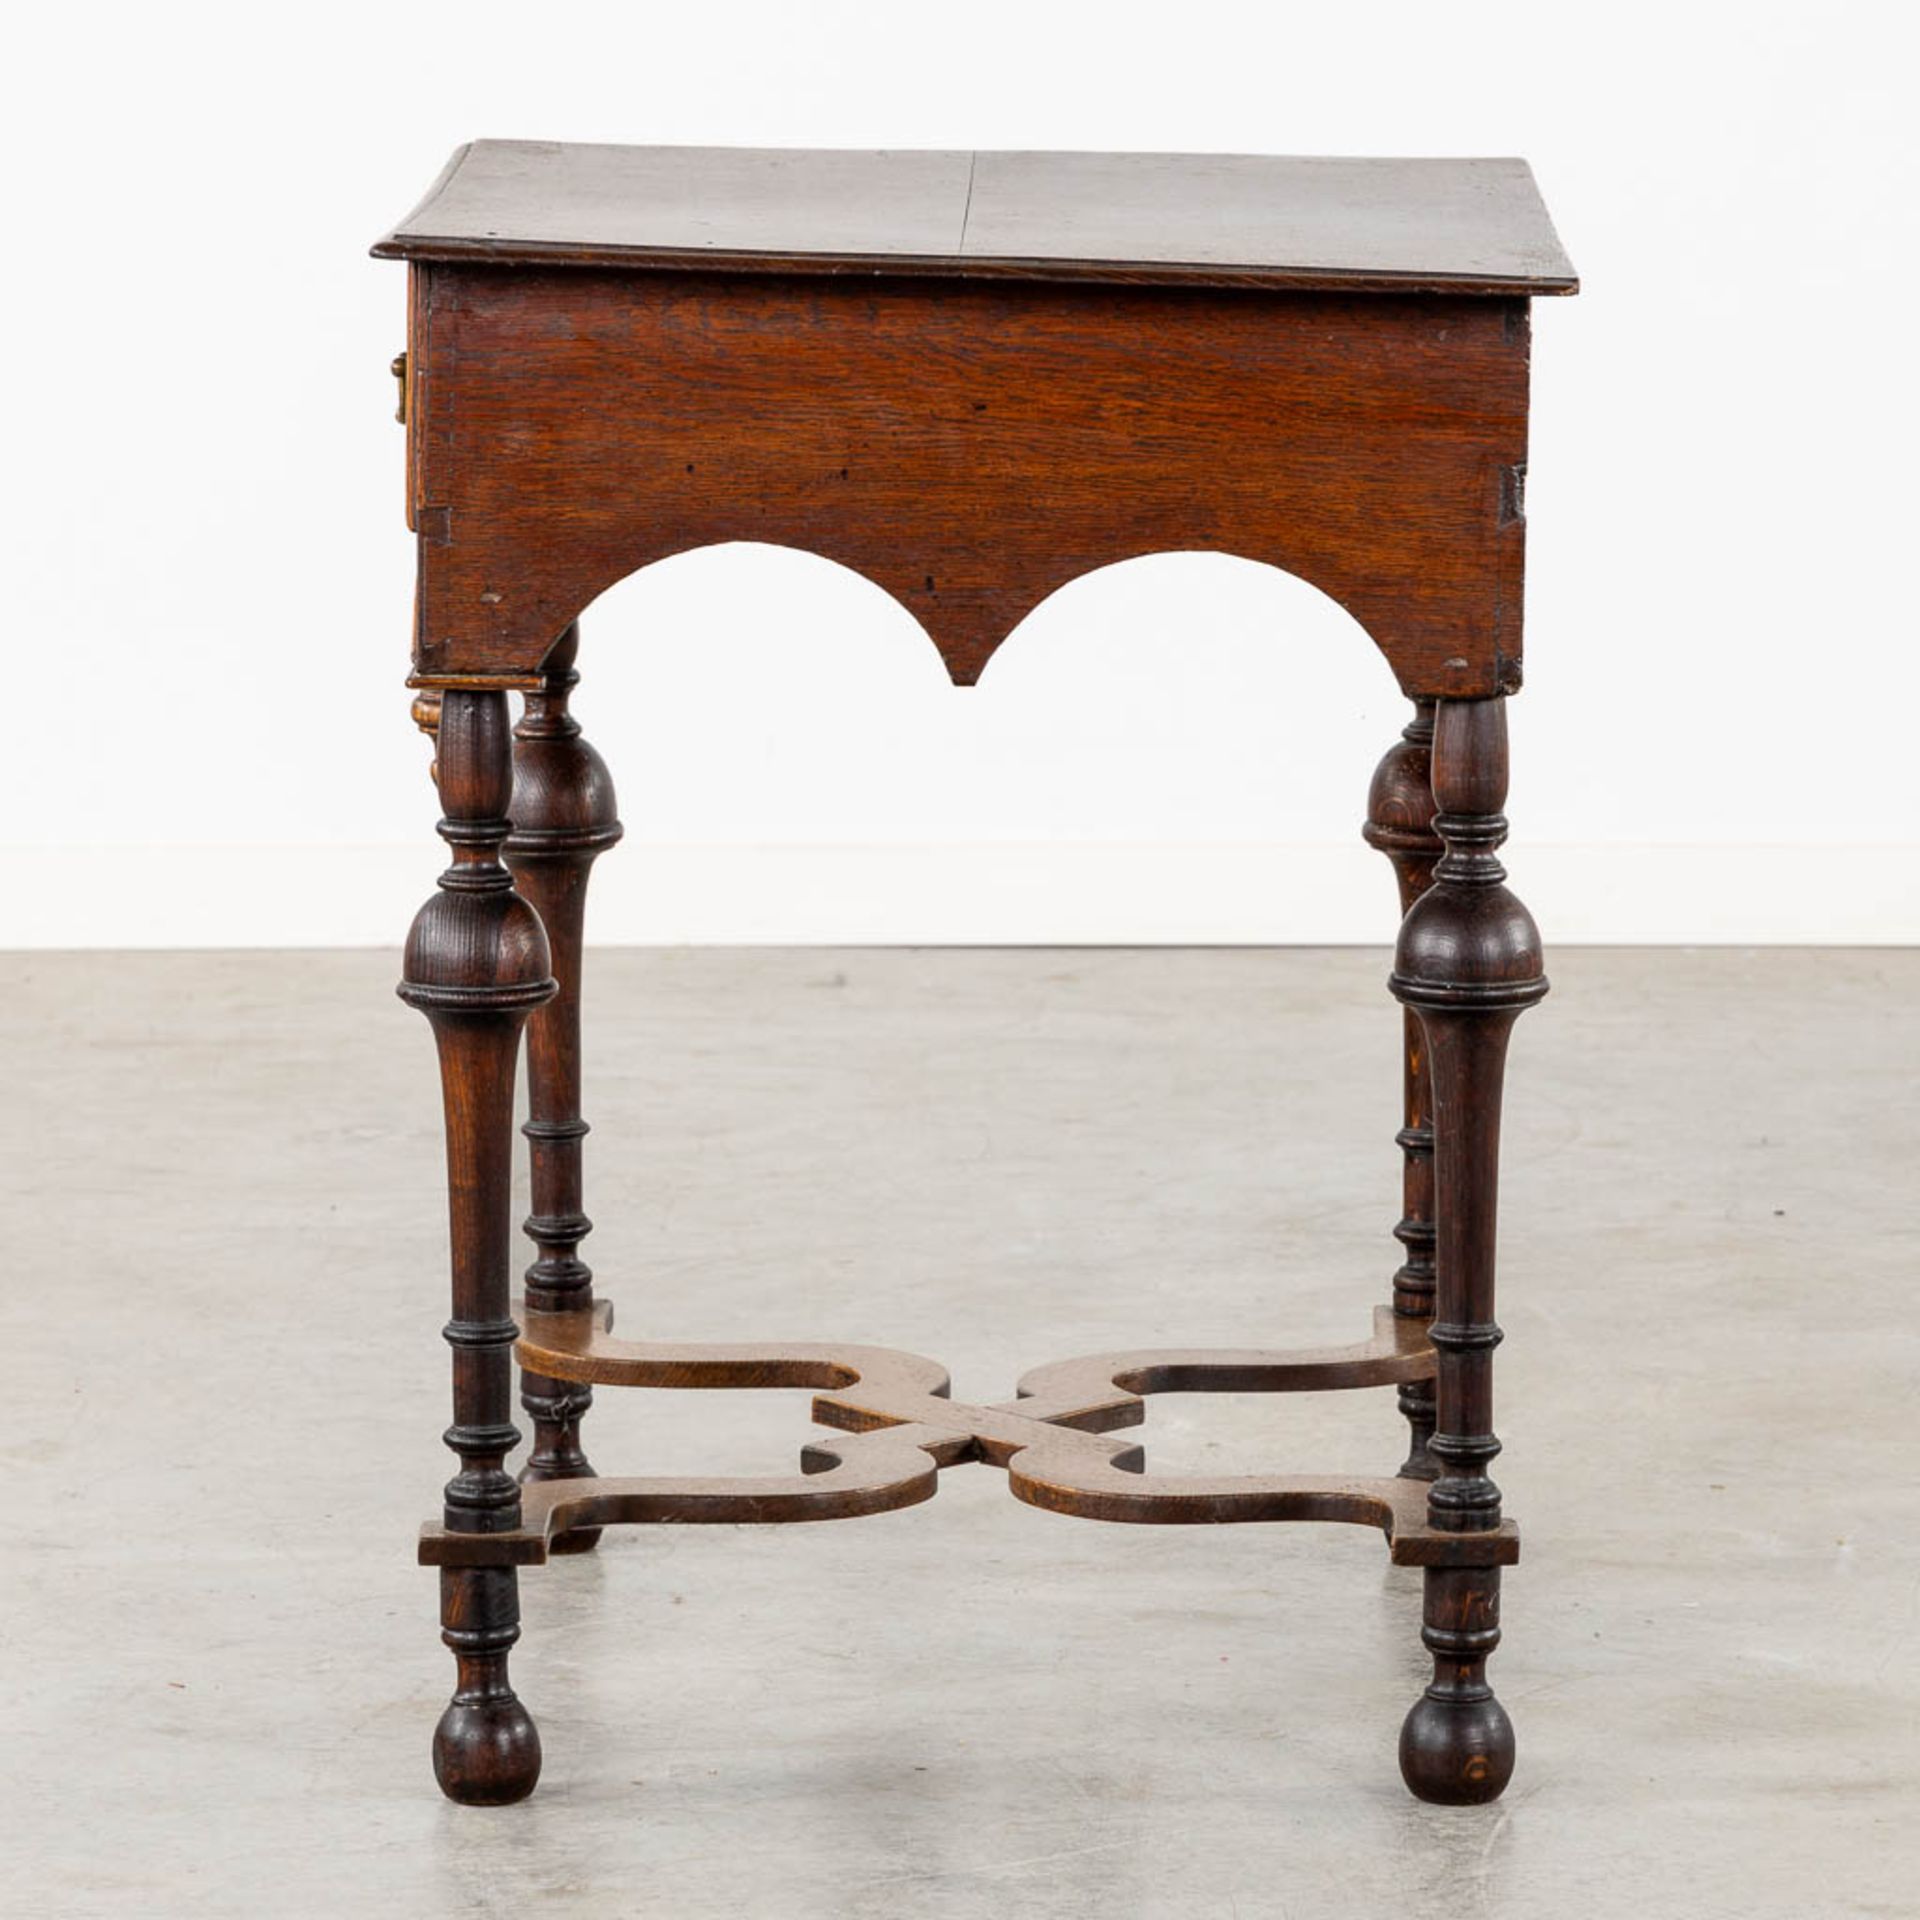 An antique oak 'Pay Table', The Netherlands, 18th C. (L:53 x W:69 x H:70 cm) - Image 5 of 11